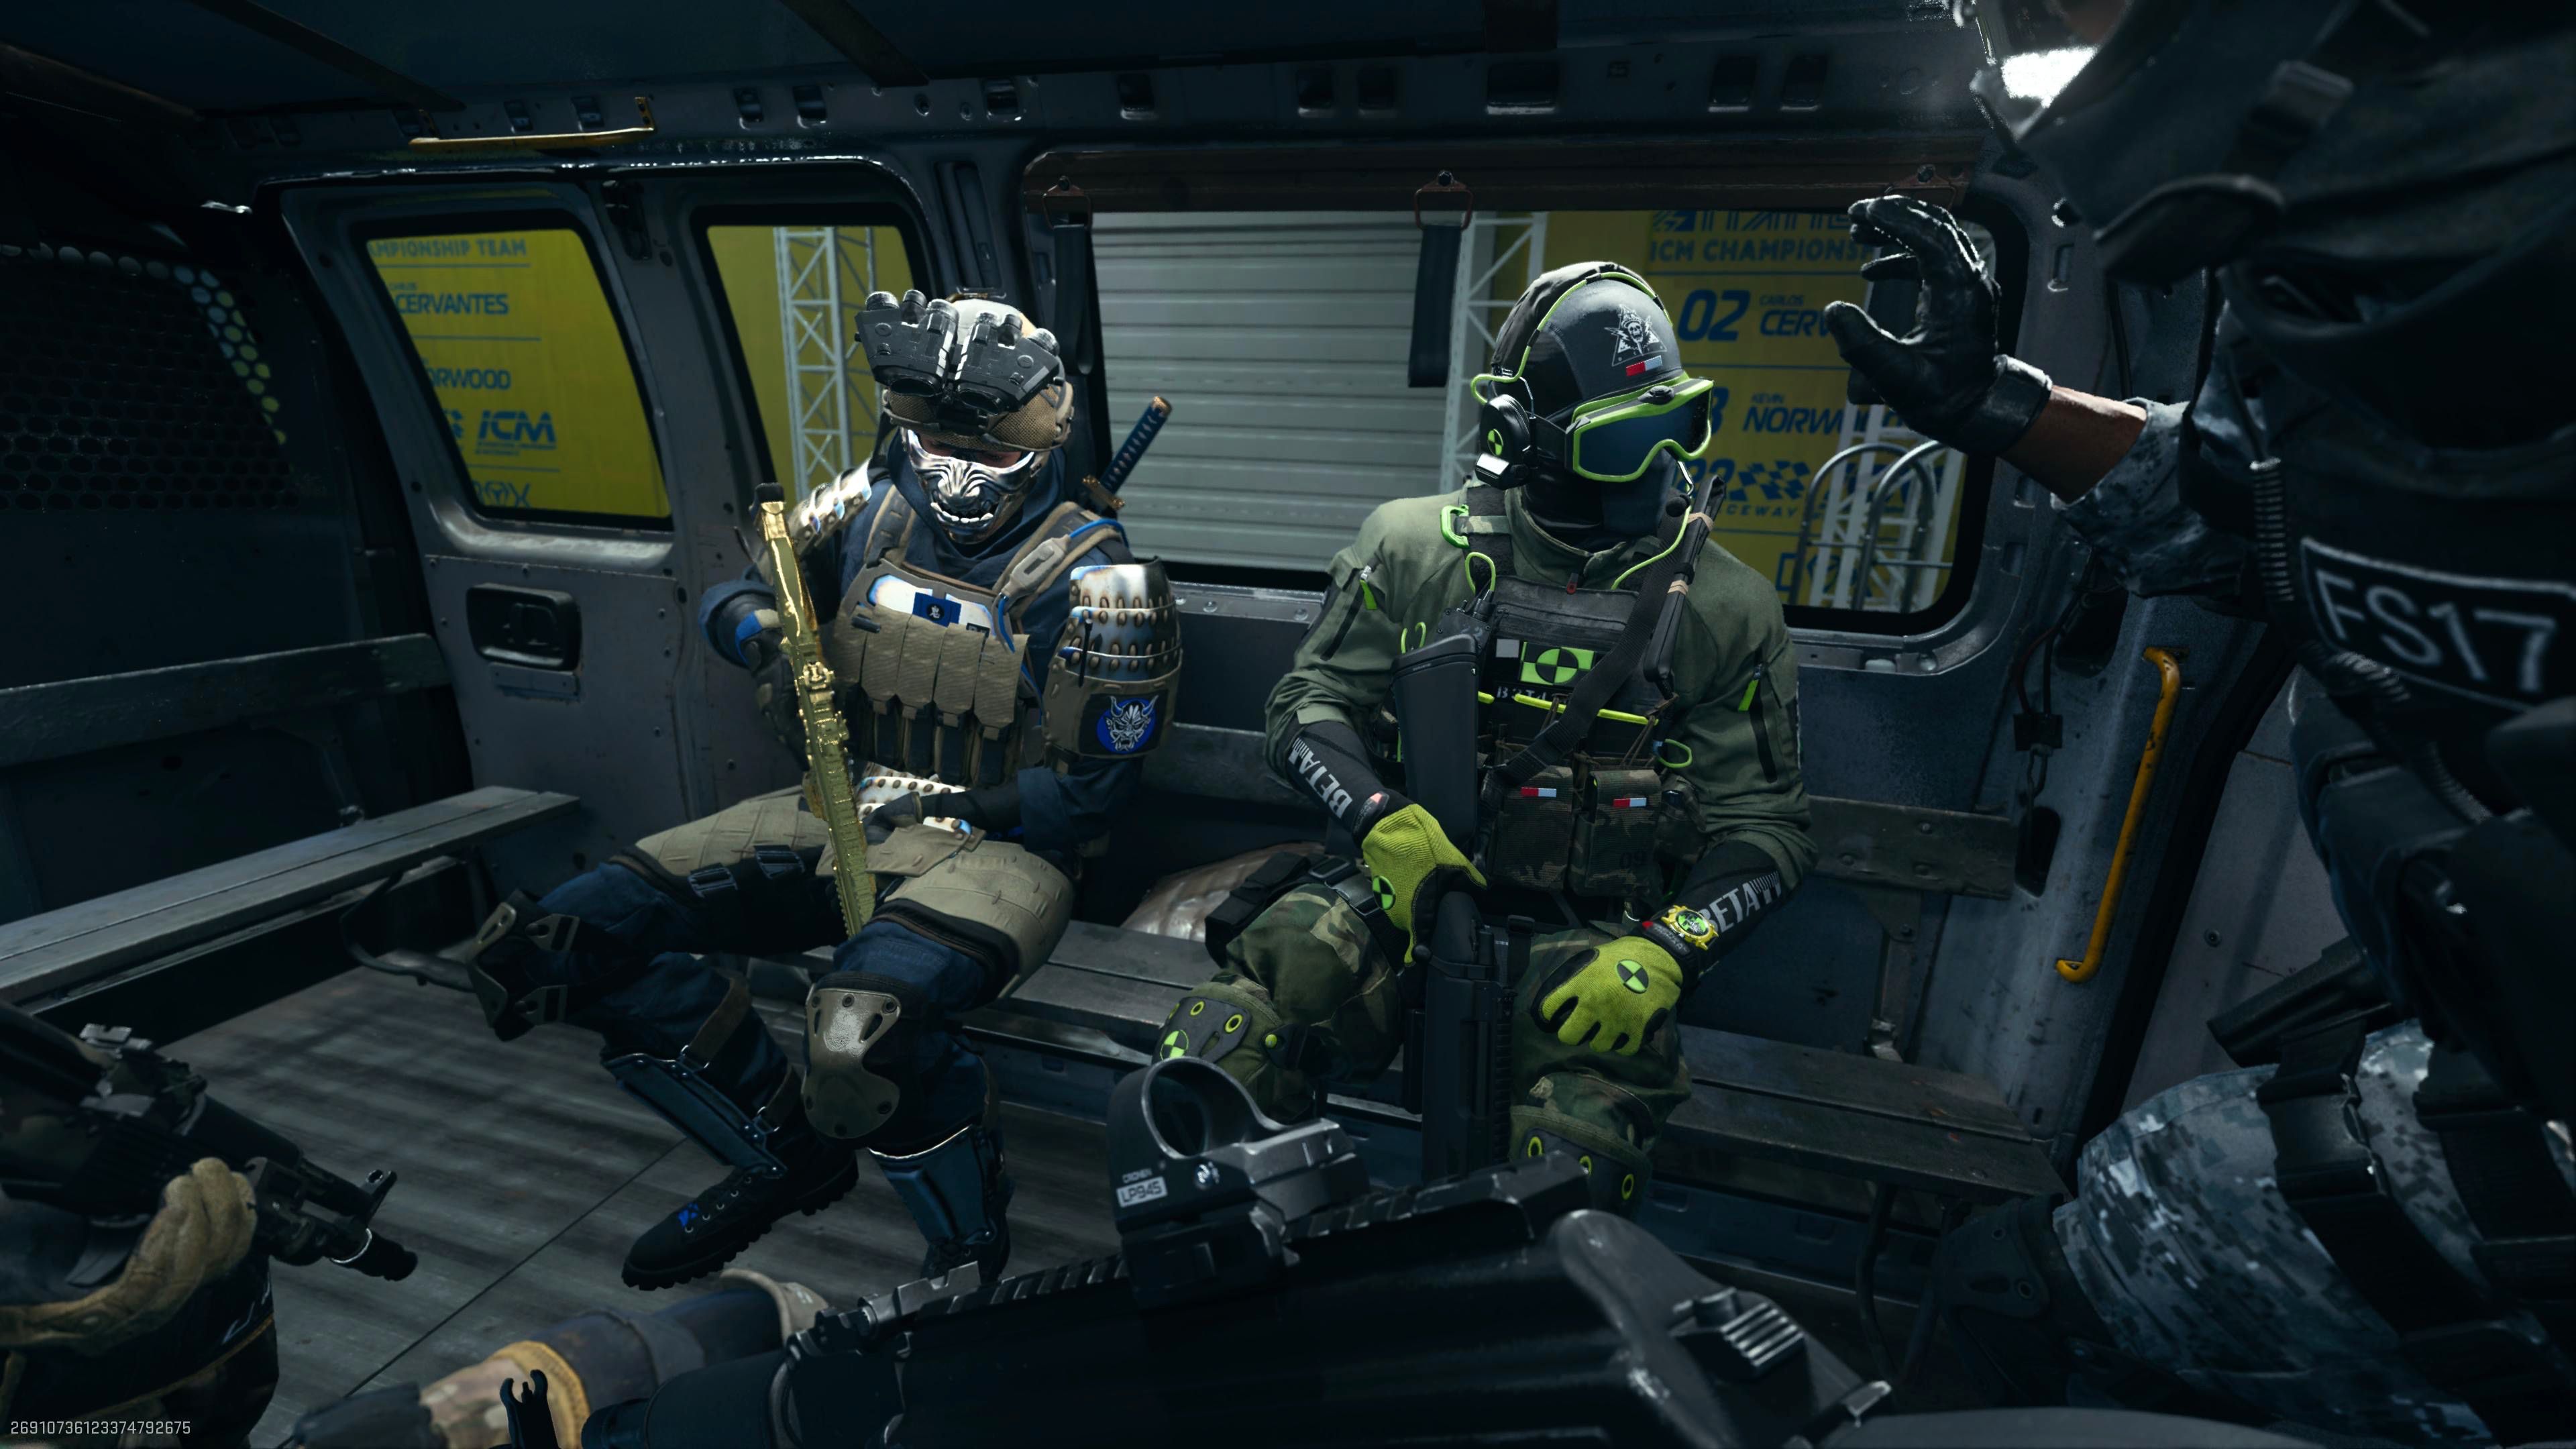 Players waiting in Modern Warfare 2's pre-game cutscene, showing the skins and weapon camps players have equipped.